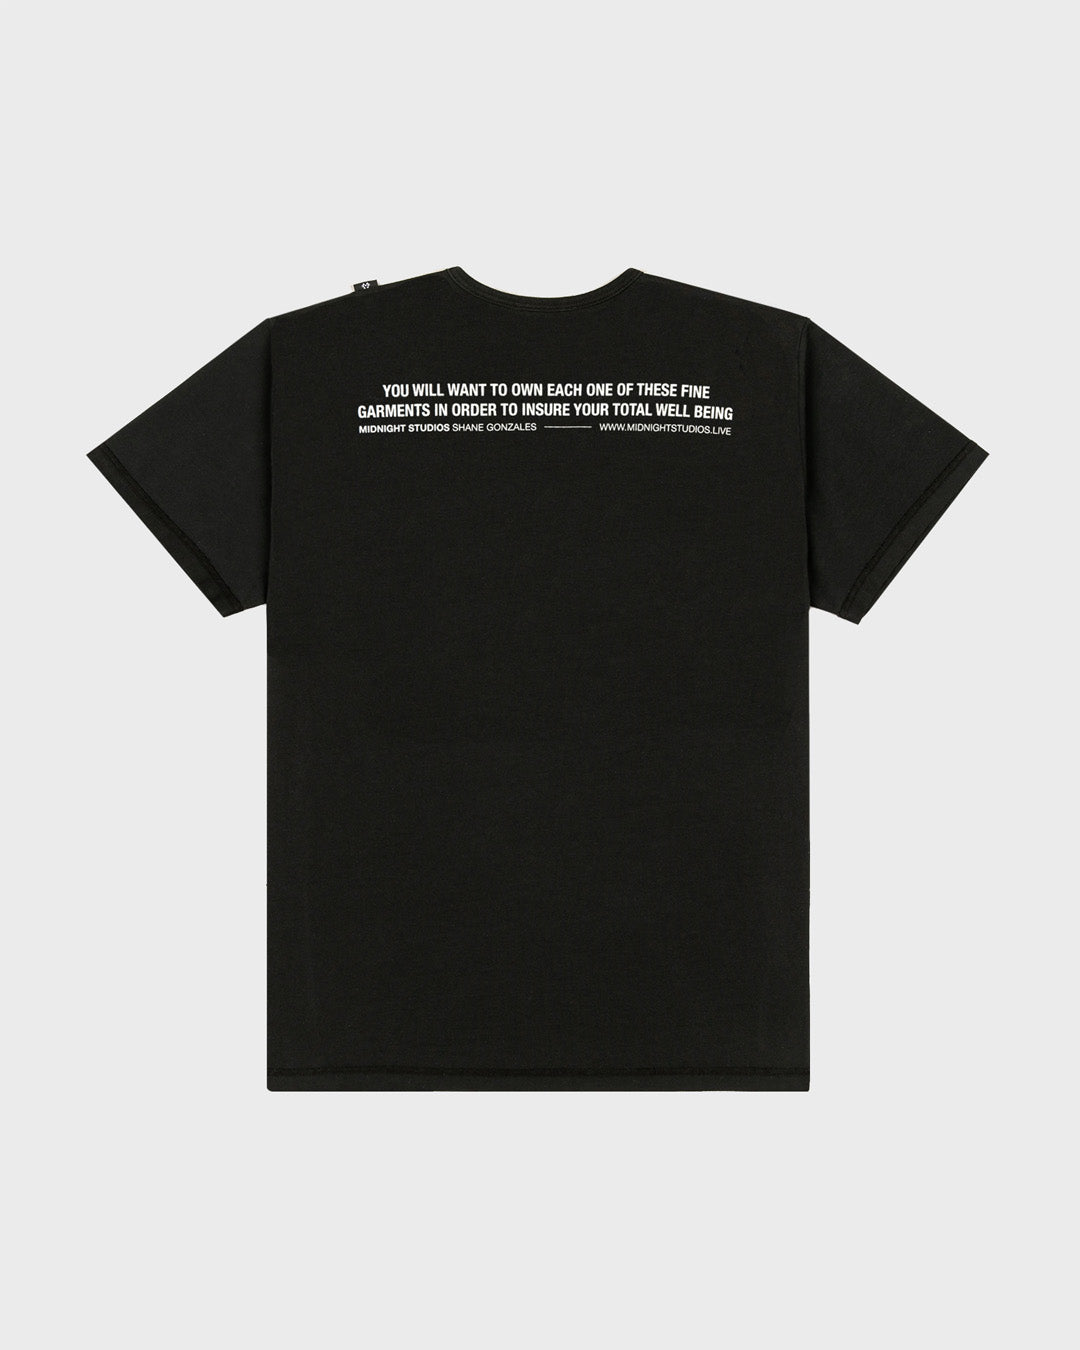 Greatest Love Songs T-Shirt in Black. Back angle.